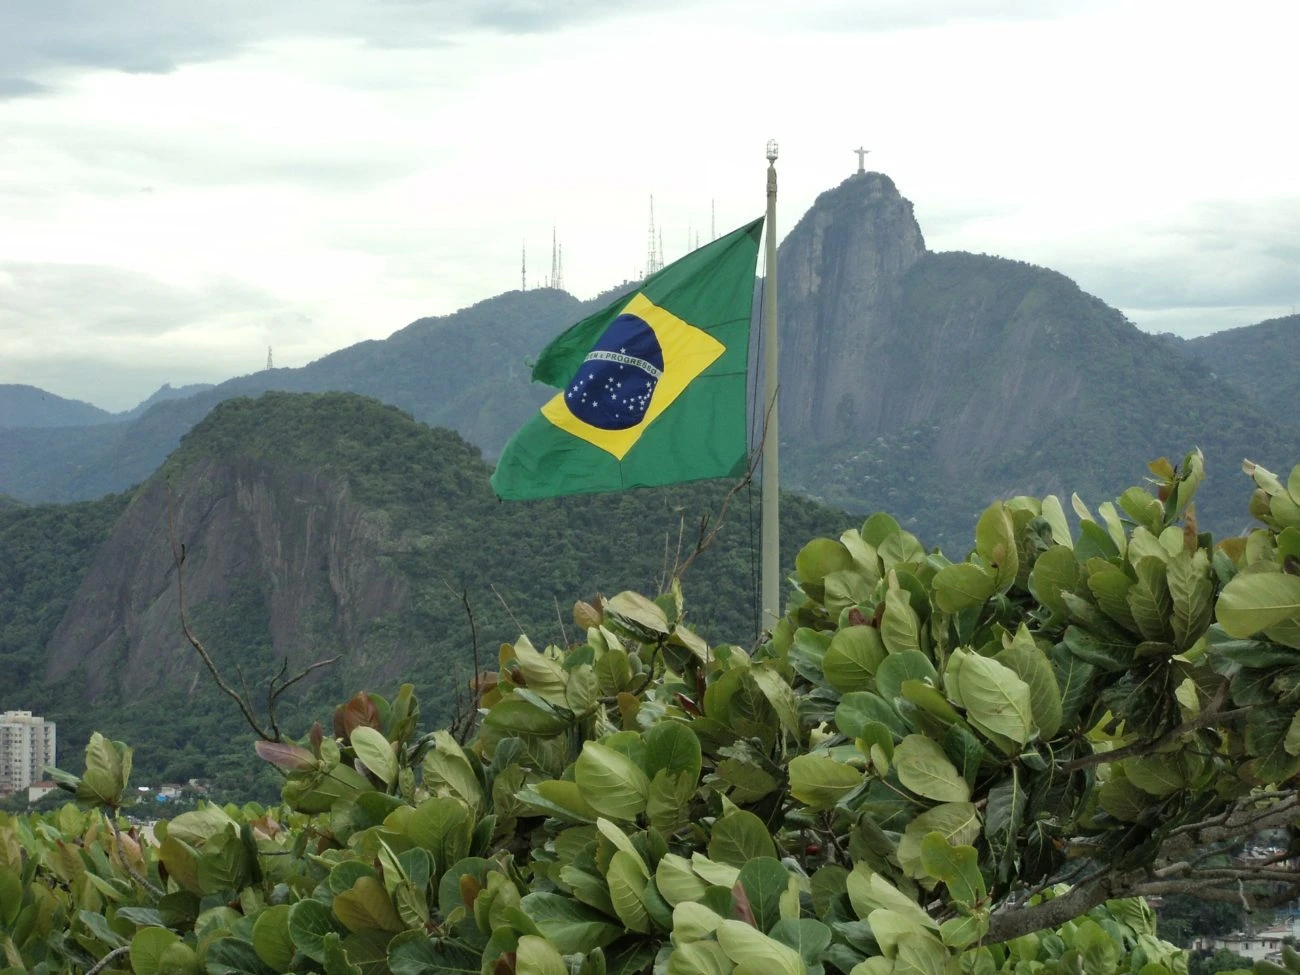 Brazil betting regulation to be ready by end of July